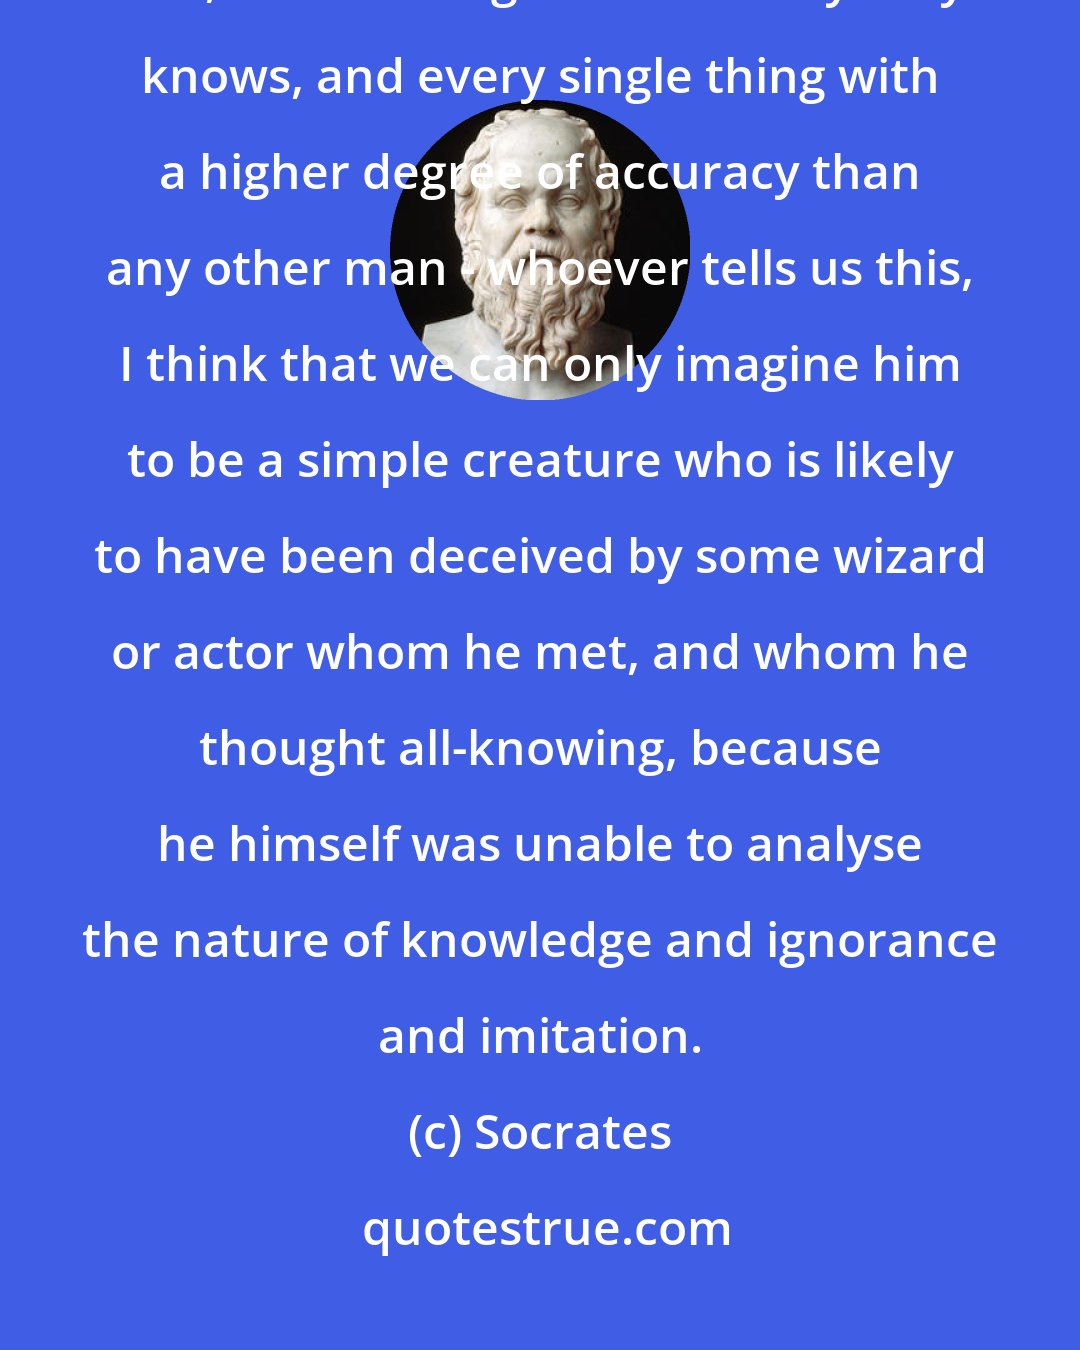 Socrates: Whenever any one informs us that he has found a man who knows all the arts, and all things else that anybody knows, and every single thing with a higher degree of accuracy than any other man - whoever tells us this, I think that we can only imagine him to be a simple creature who is likely to have been deceived by some wizard or actor whom he met, and whom he thought all-knowing, because he himself was unable to analyse the nature of knowledge and ignorance and imitation.